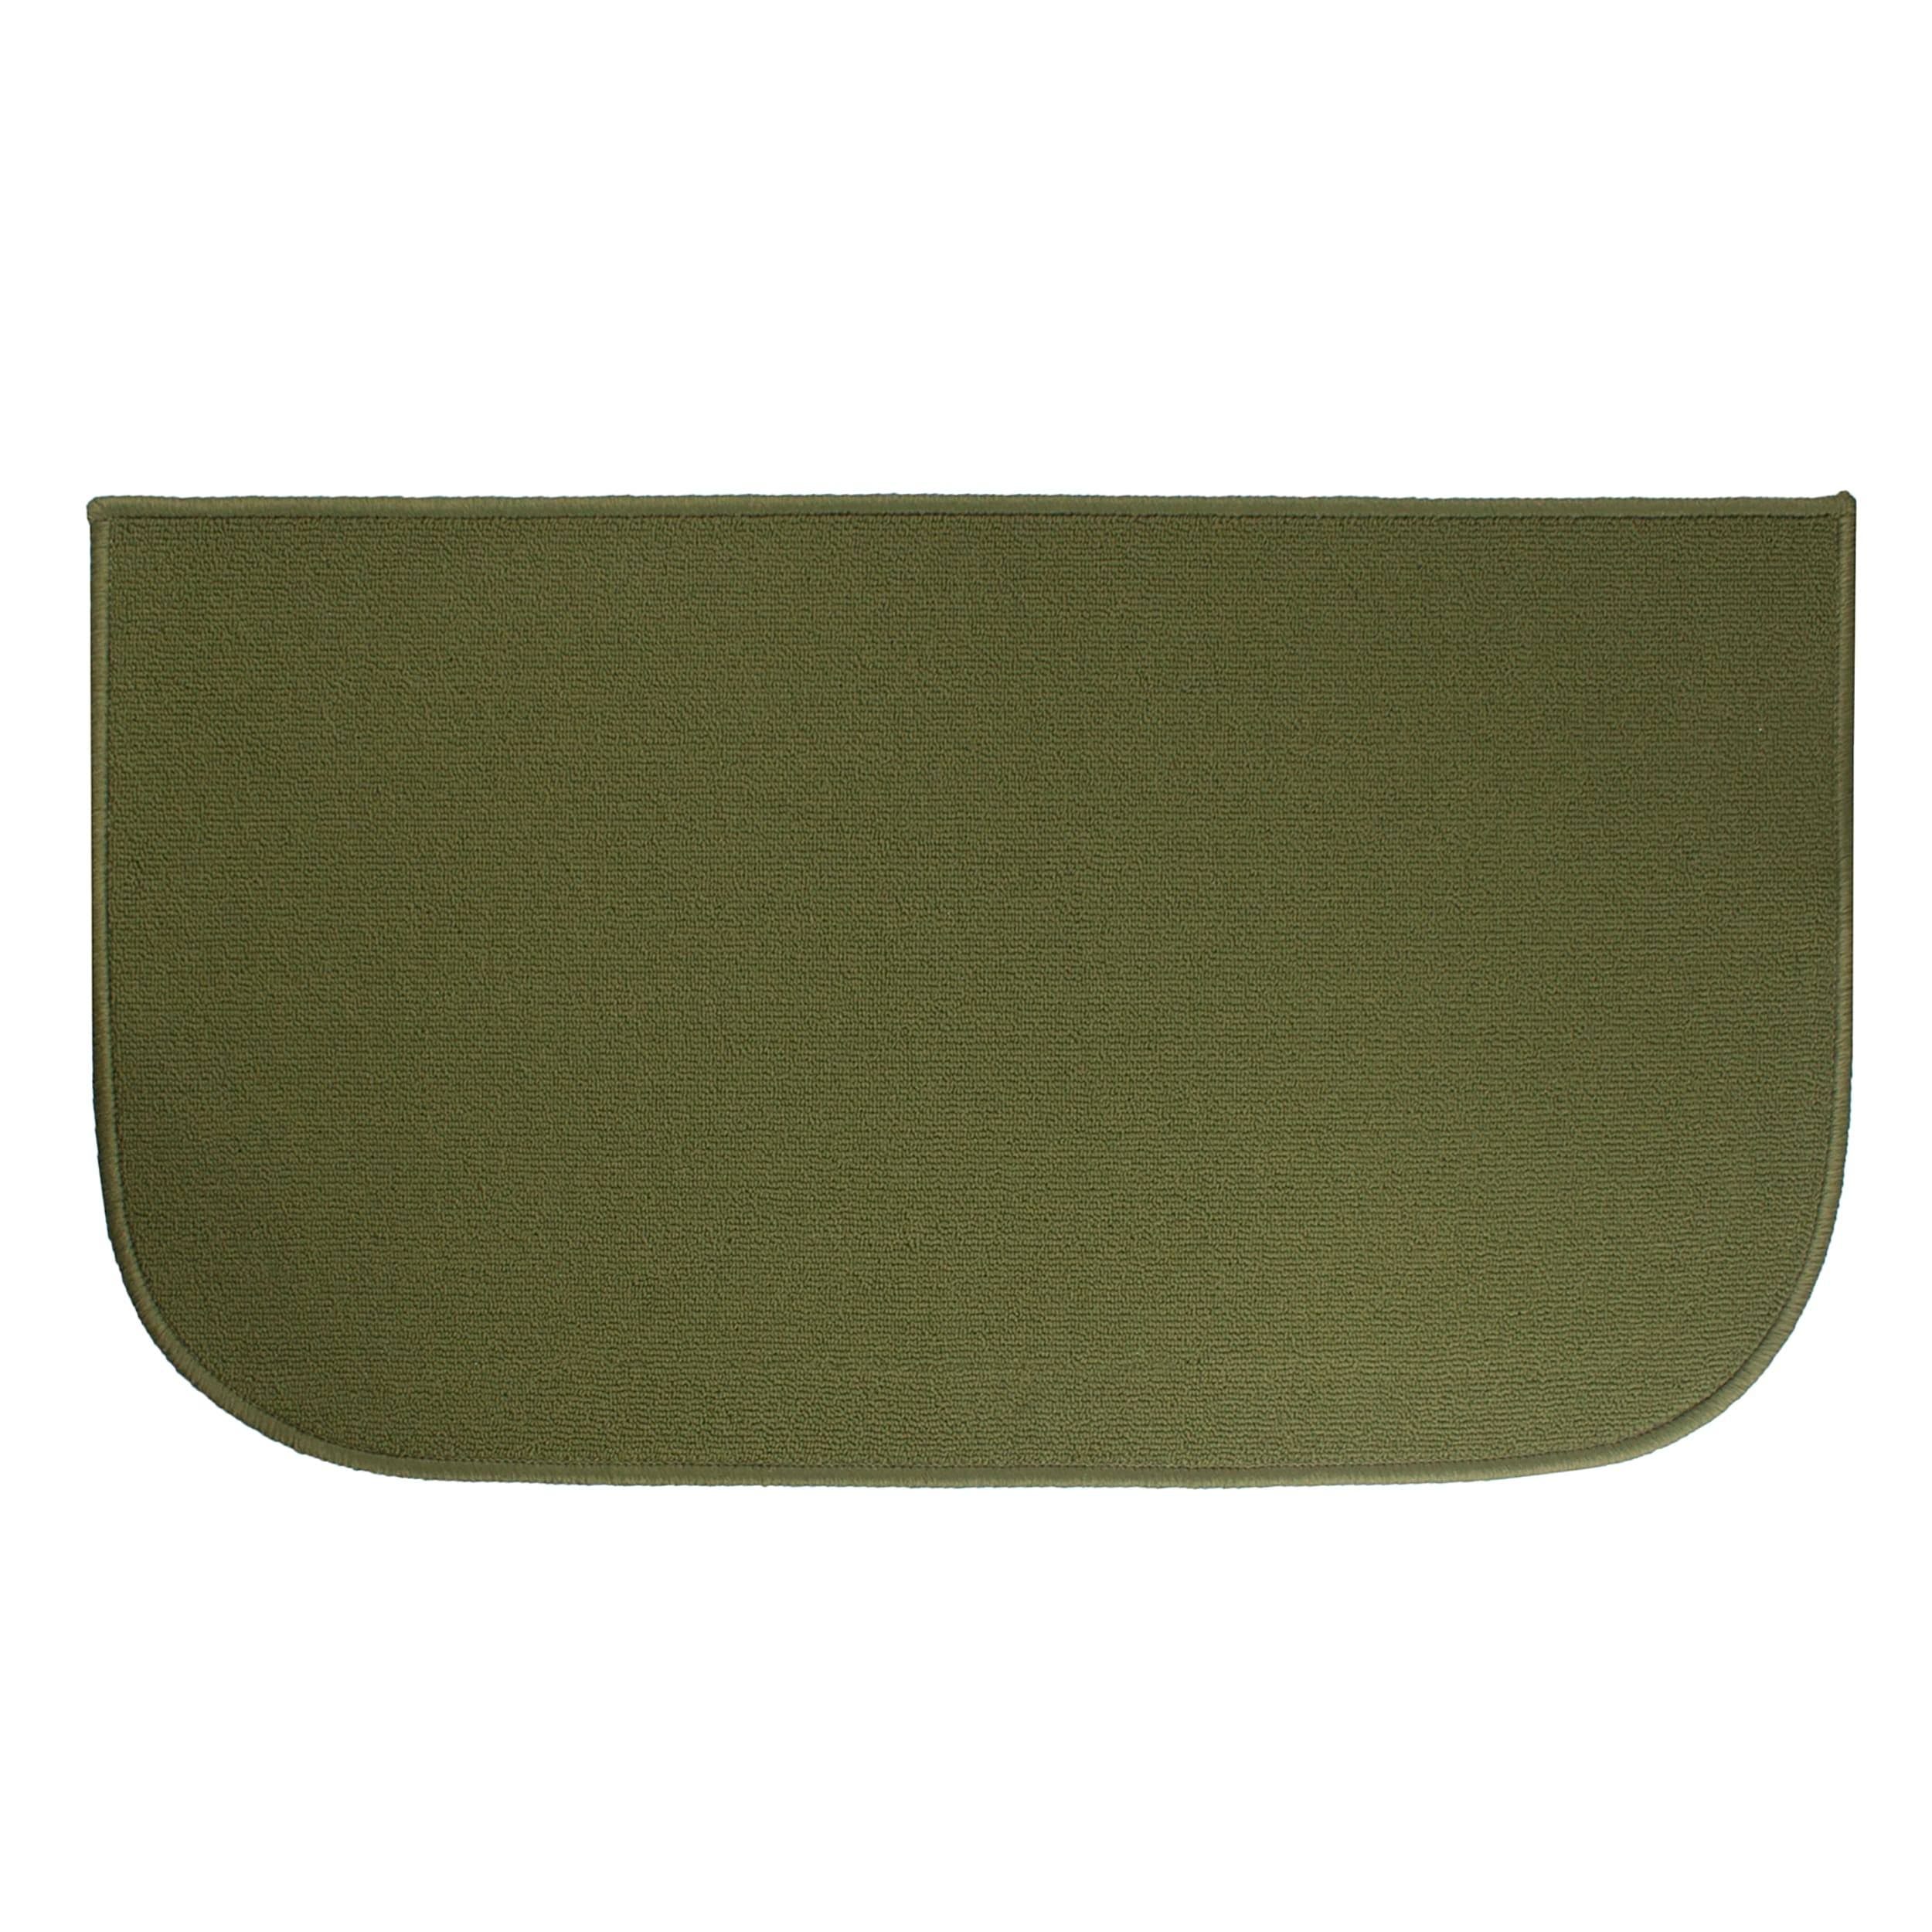 Ritz Accent Kitchen Rug With Latex Backing - Olive Green